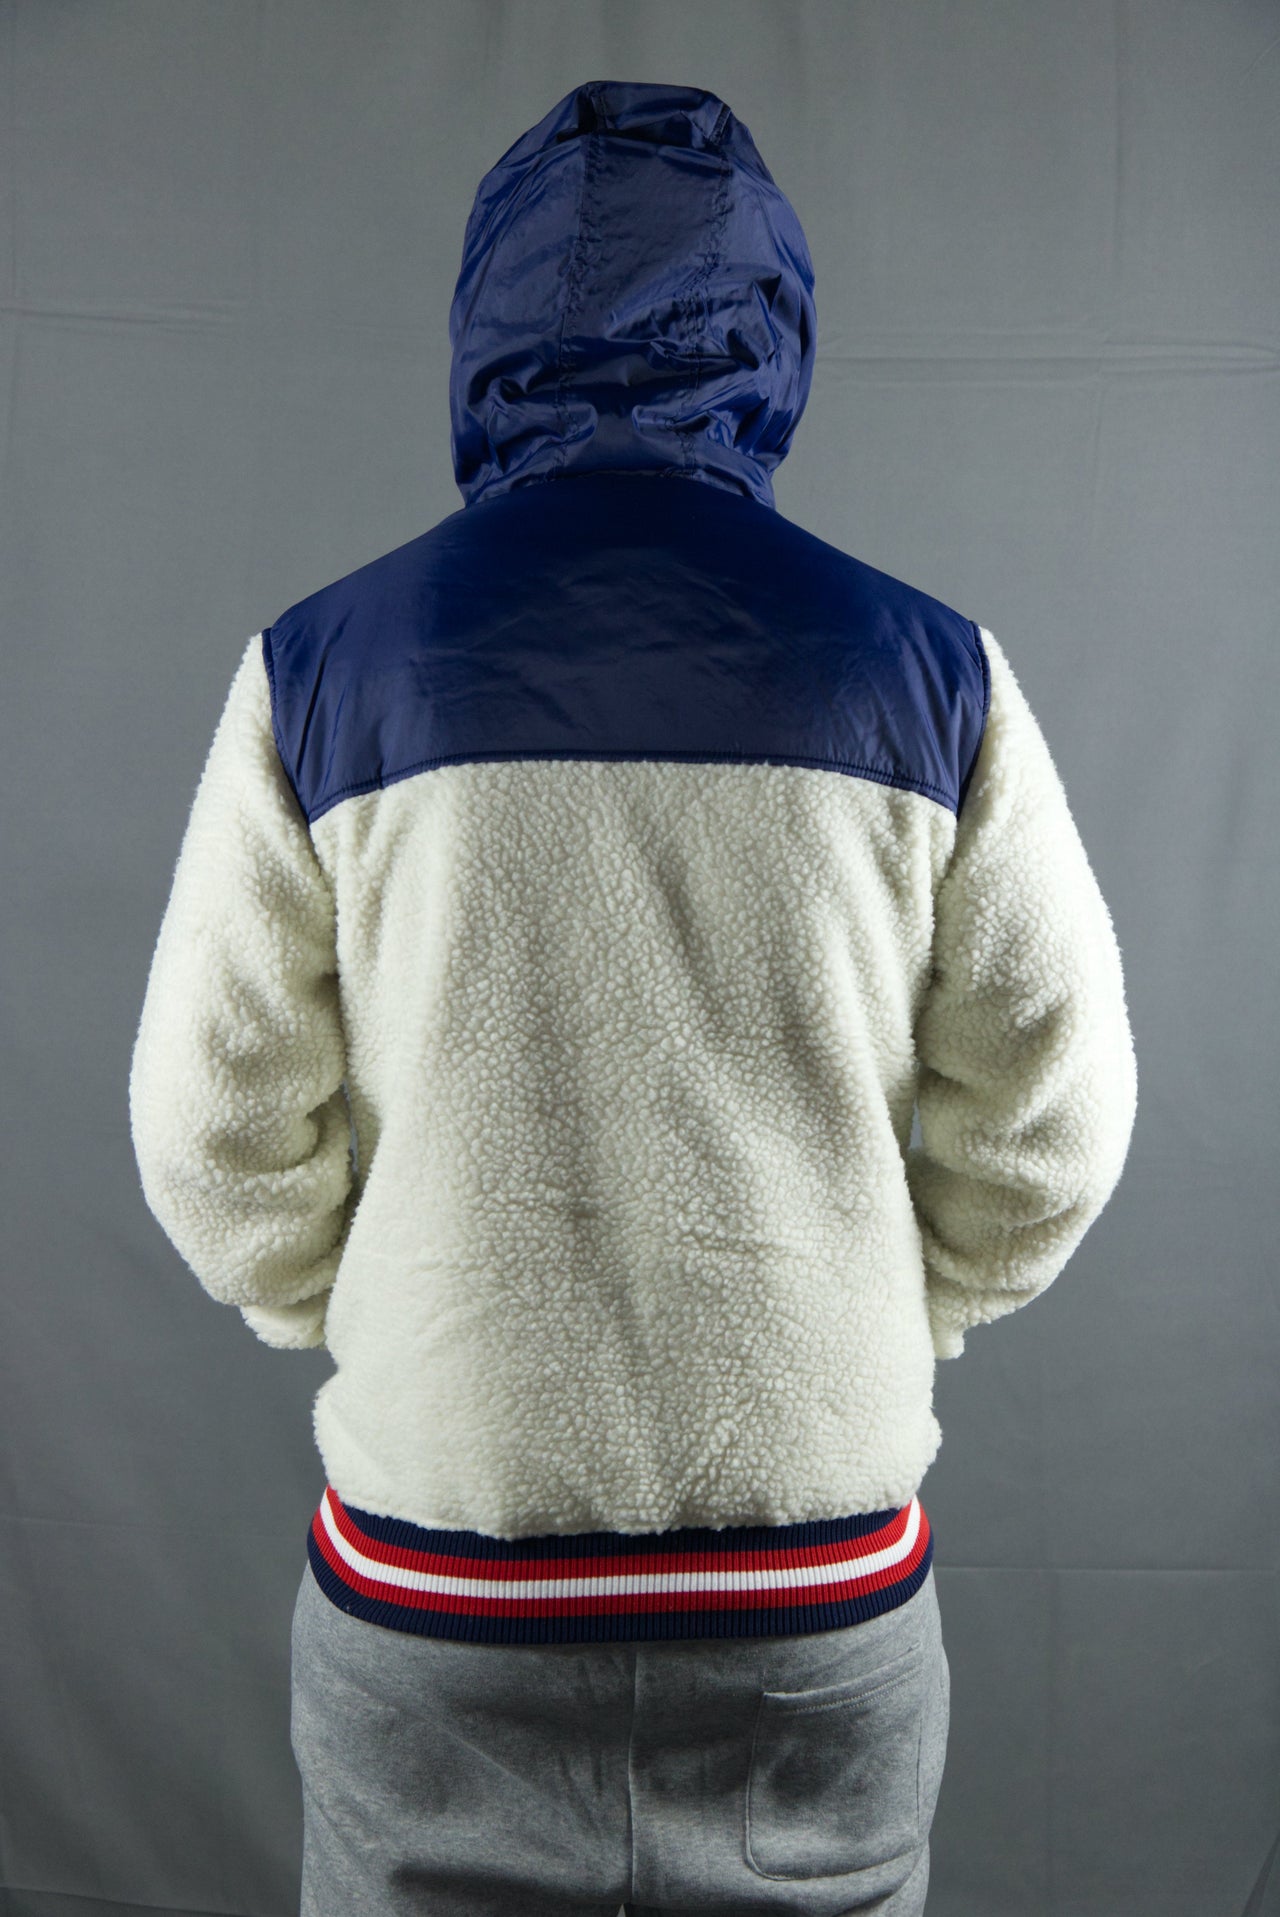 The hood and upper back of the cream zipper sherpa hoodie are made out of a navy blue nylon material